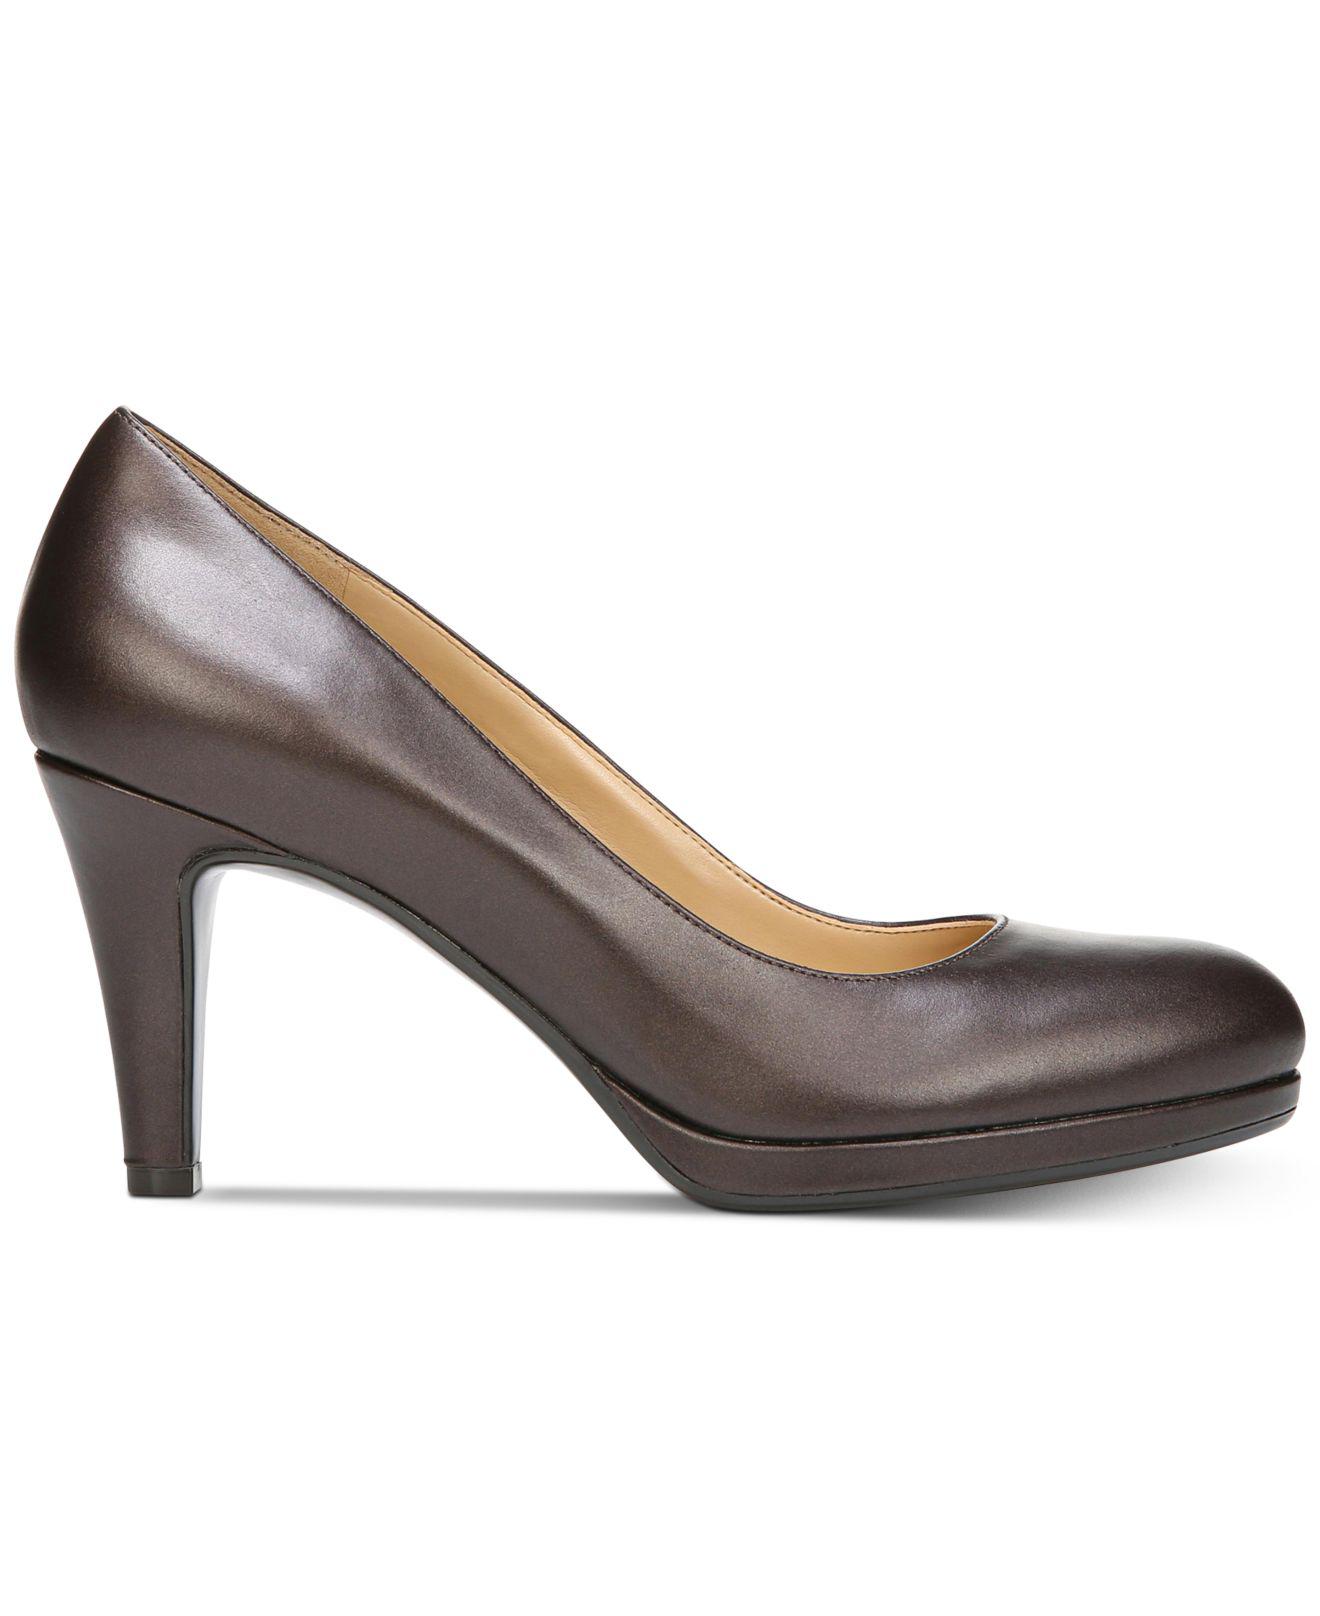 Naturalizer Leather Michelle Pumps in 